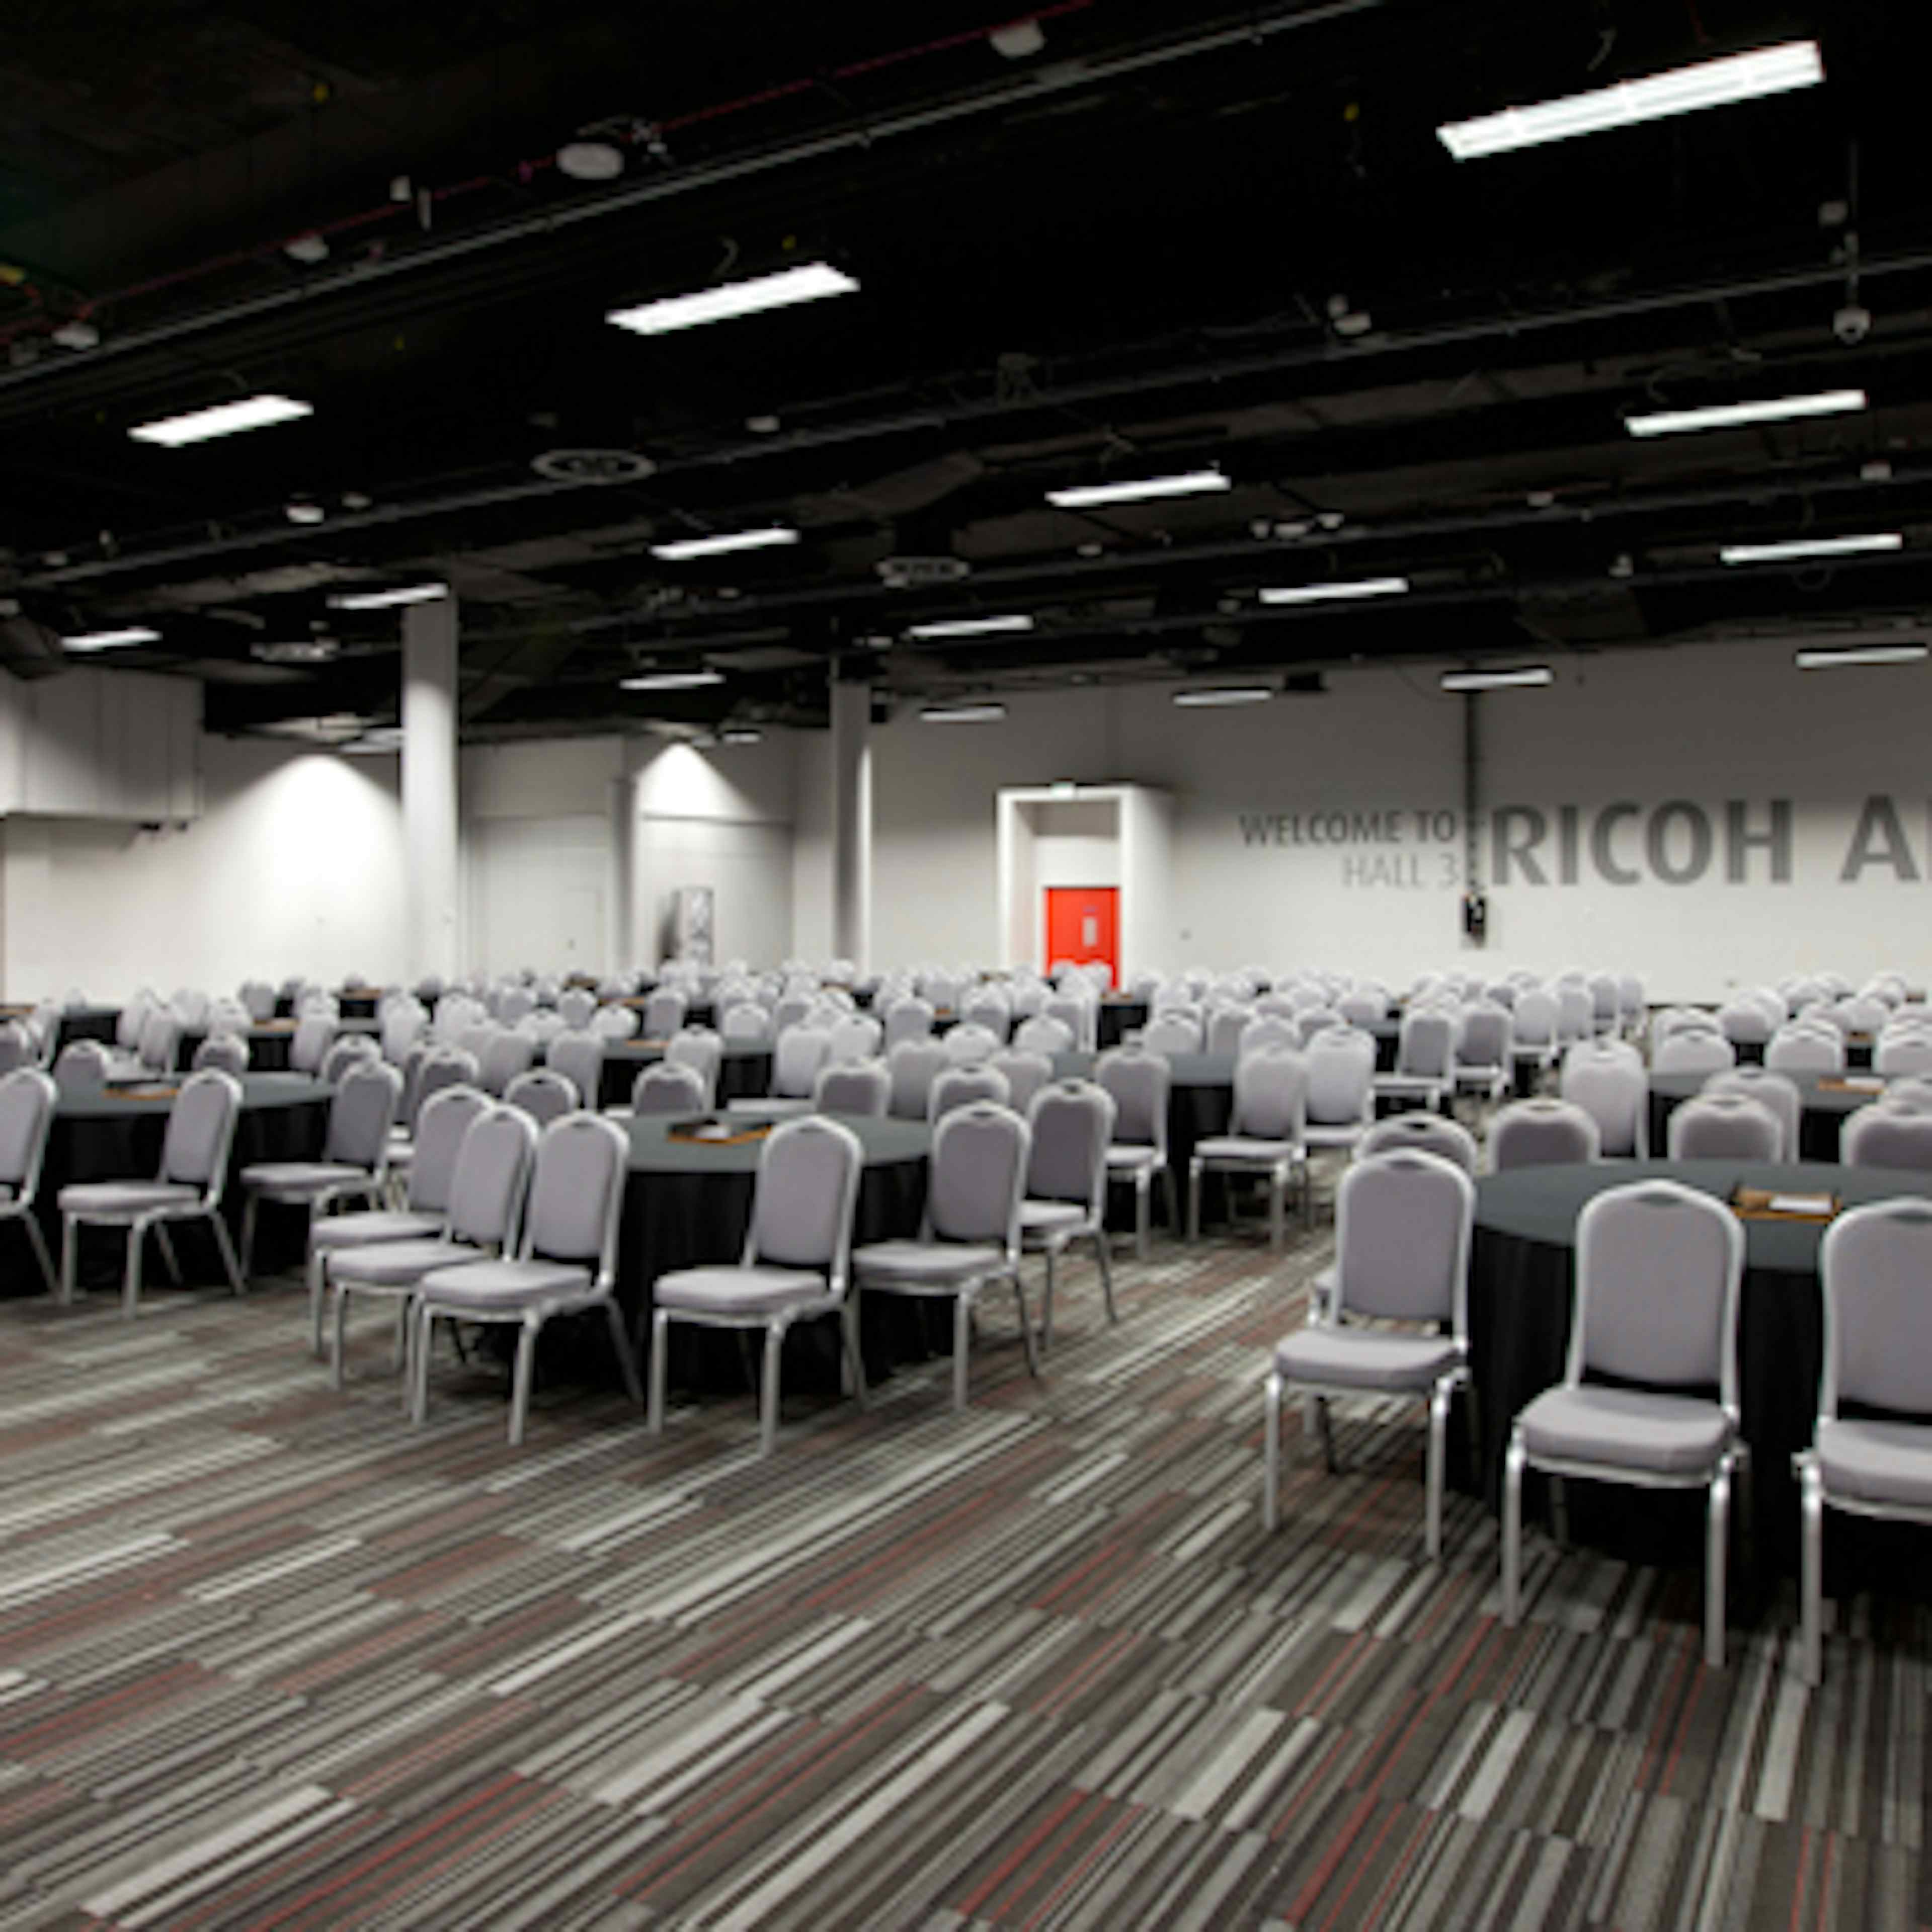 Coventry Building Society Arena - Convention Hall 3 image 1